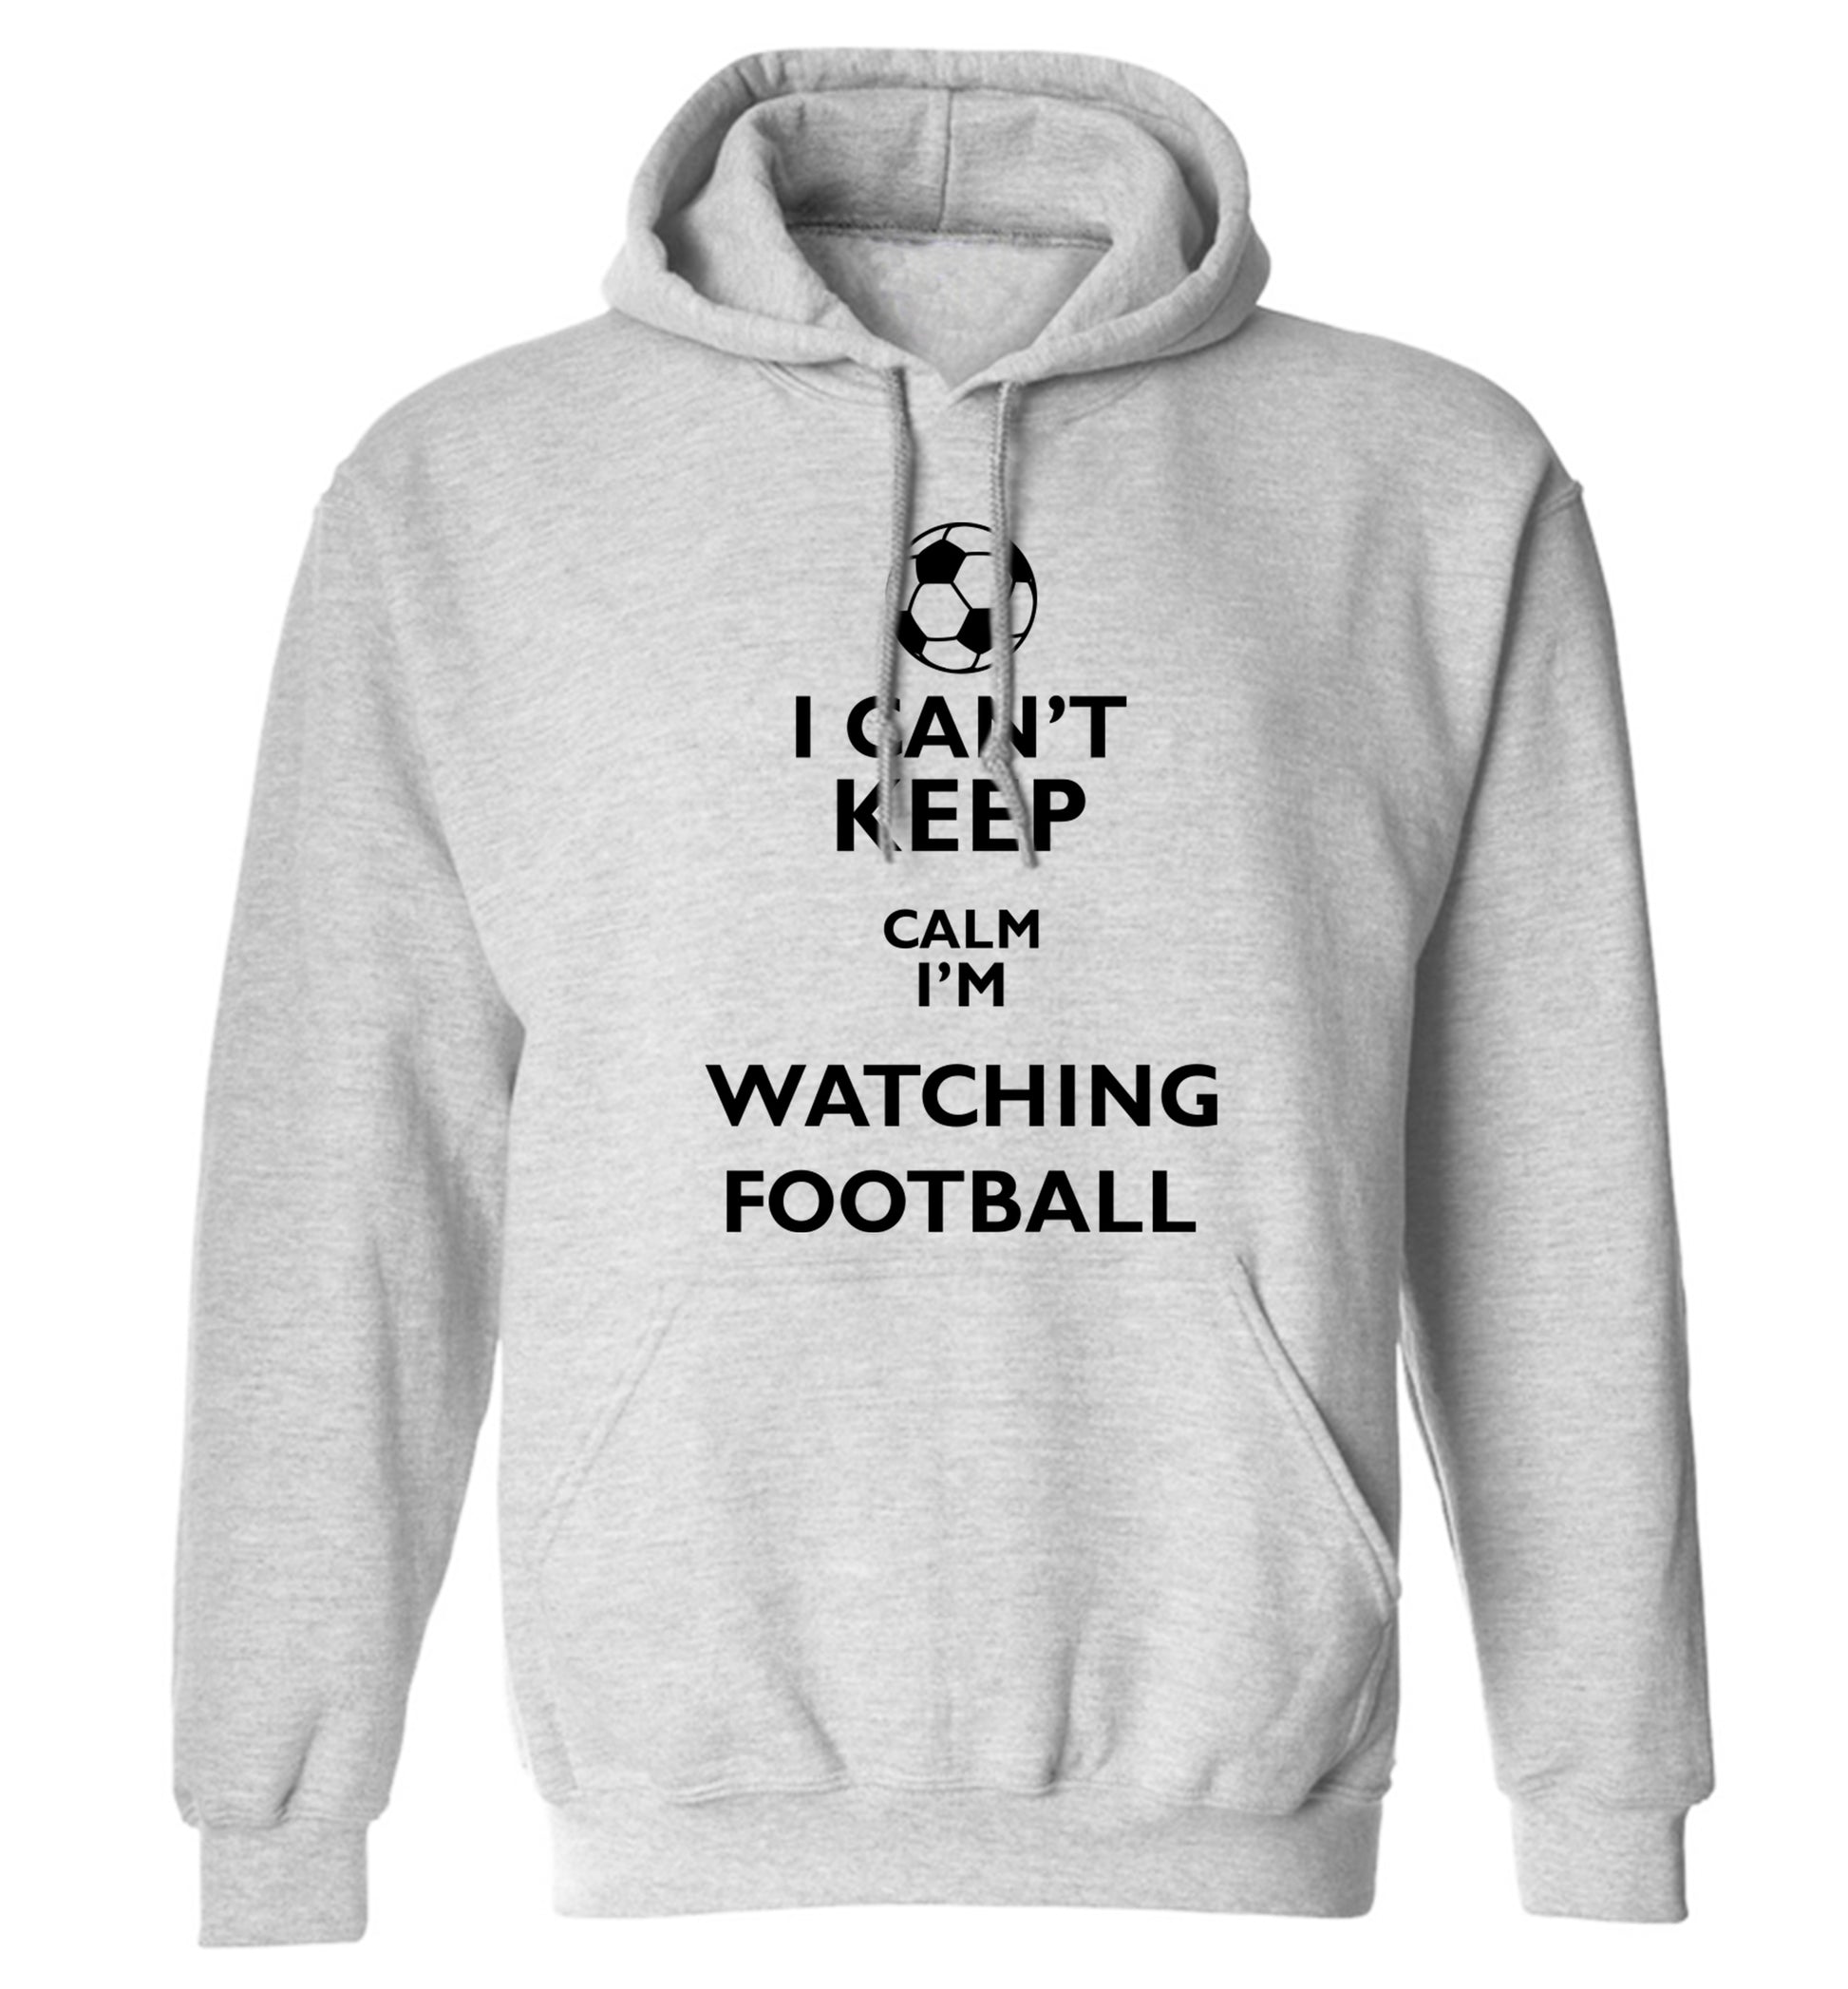 I can't keep calm I'm watching the football adults unisexgrey hoodie 2XL